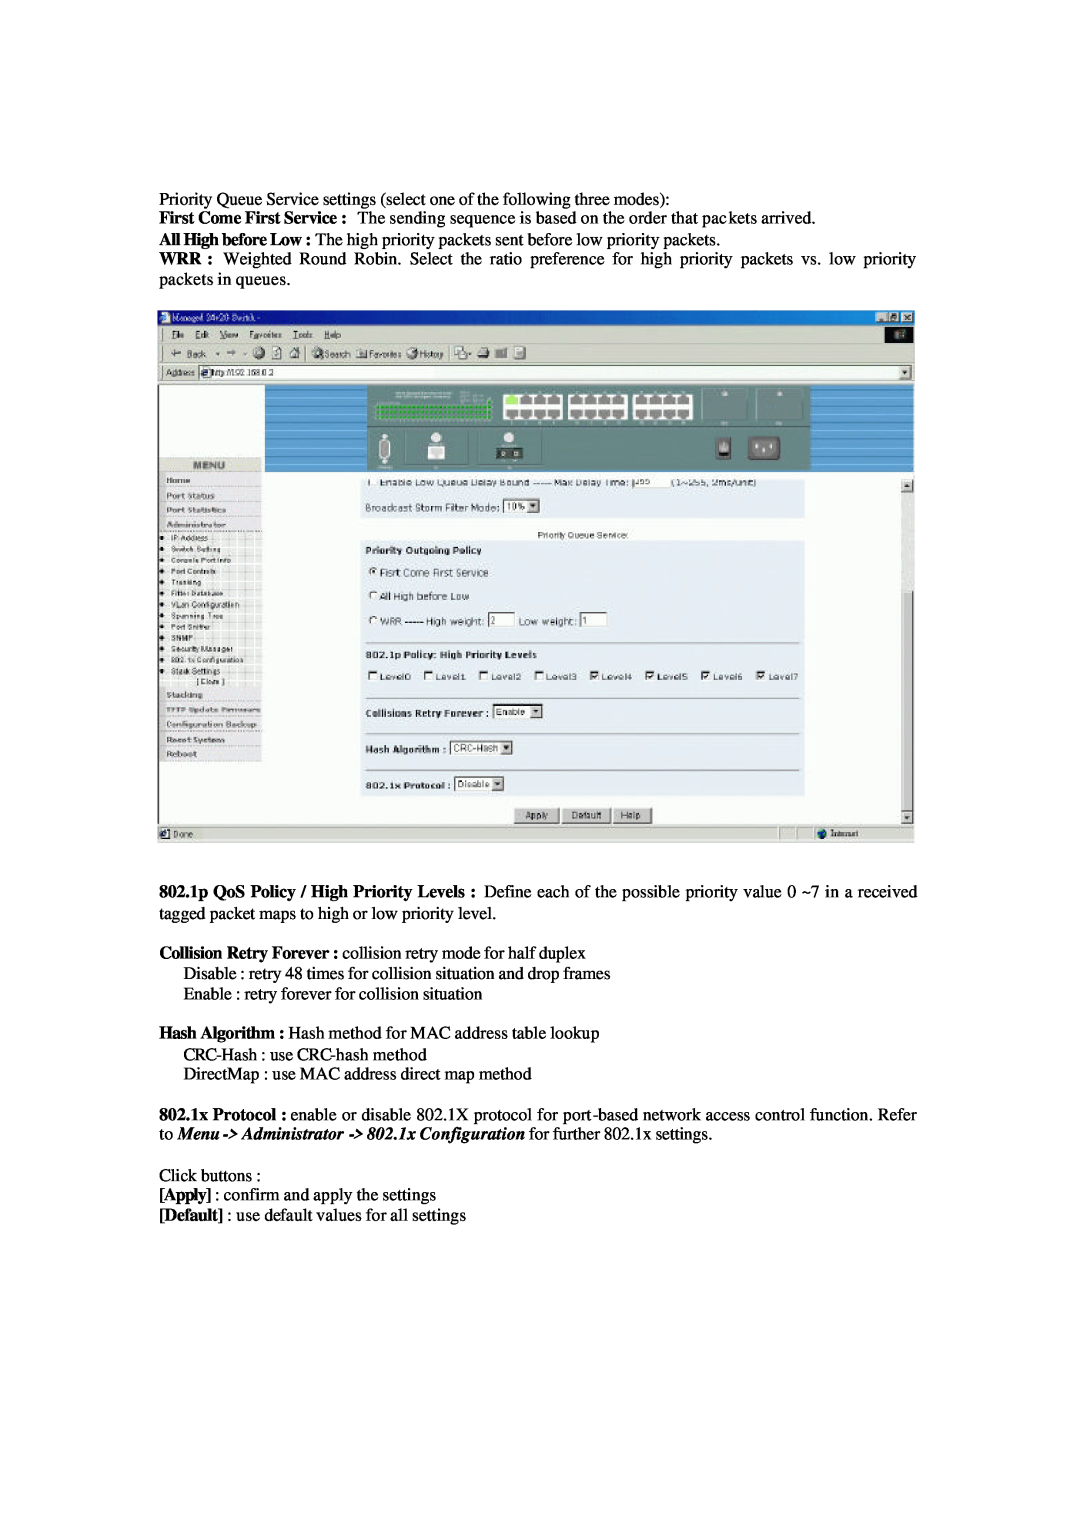 Xerox NS-2260 operation manual Enable : retry forever for collision situation, CRC-Hash :use CRC-hashmethod, Click buttons 